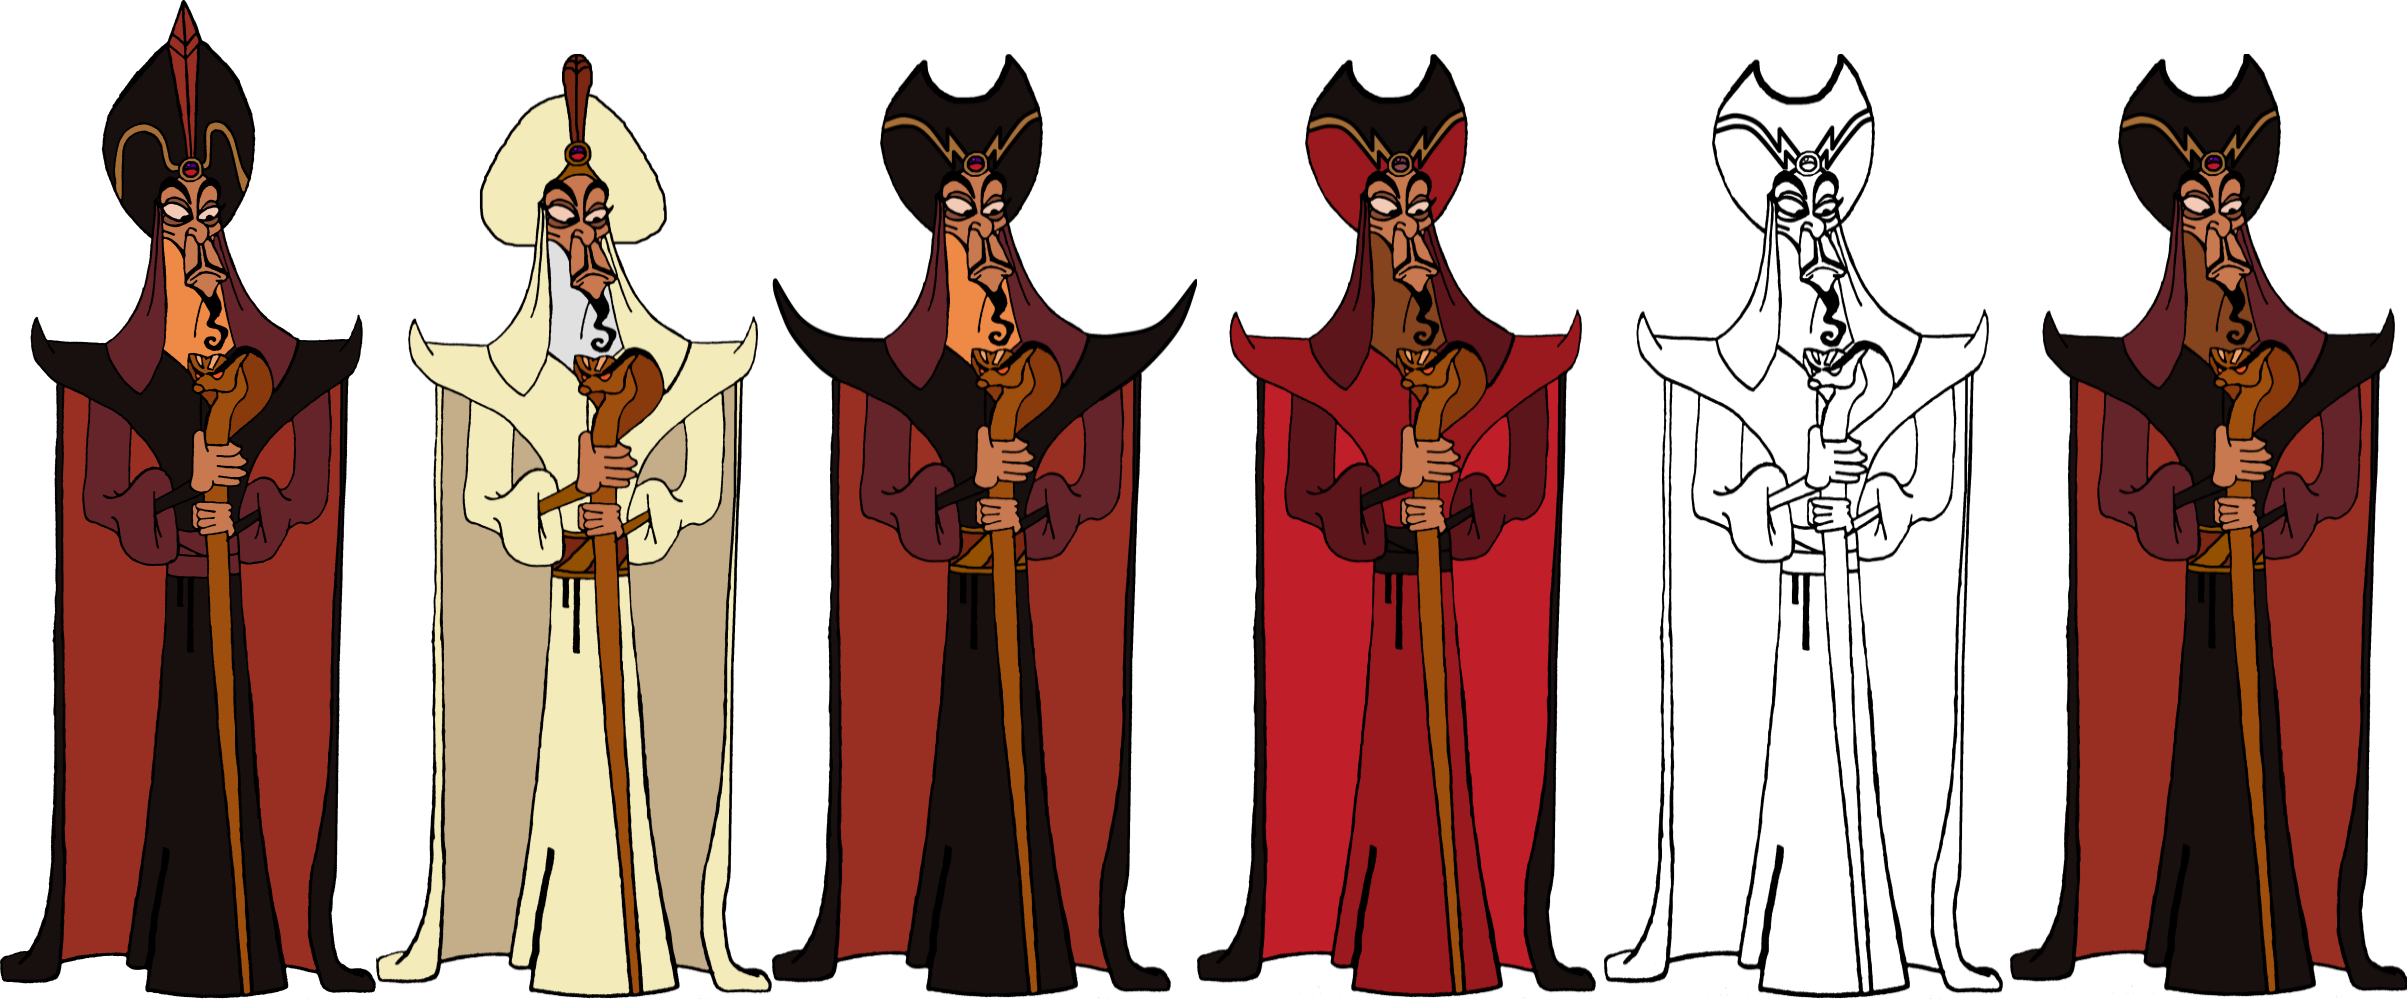 jafar__s_stages_by_ryanh1984-d4o4rvq.png